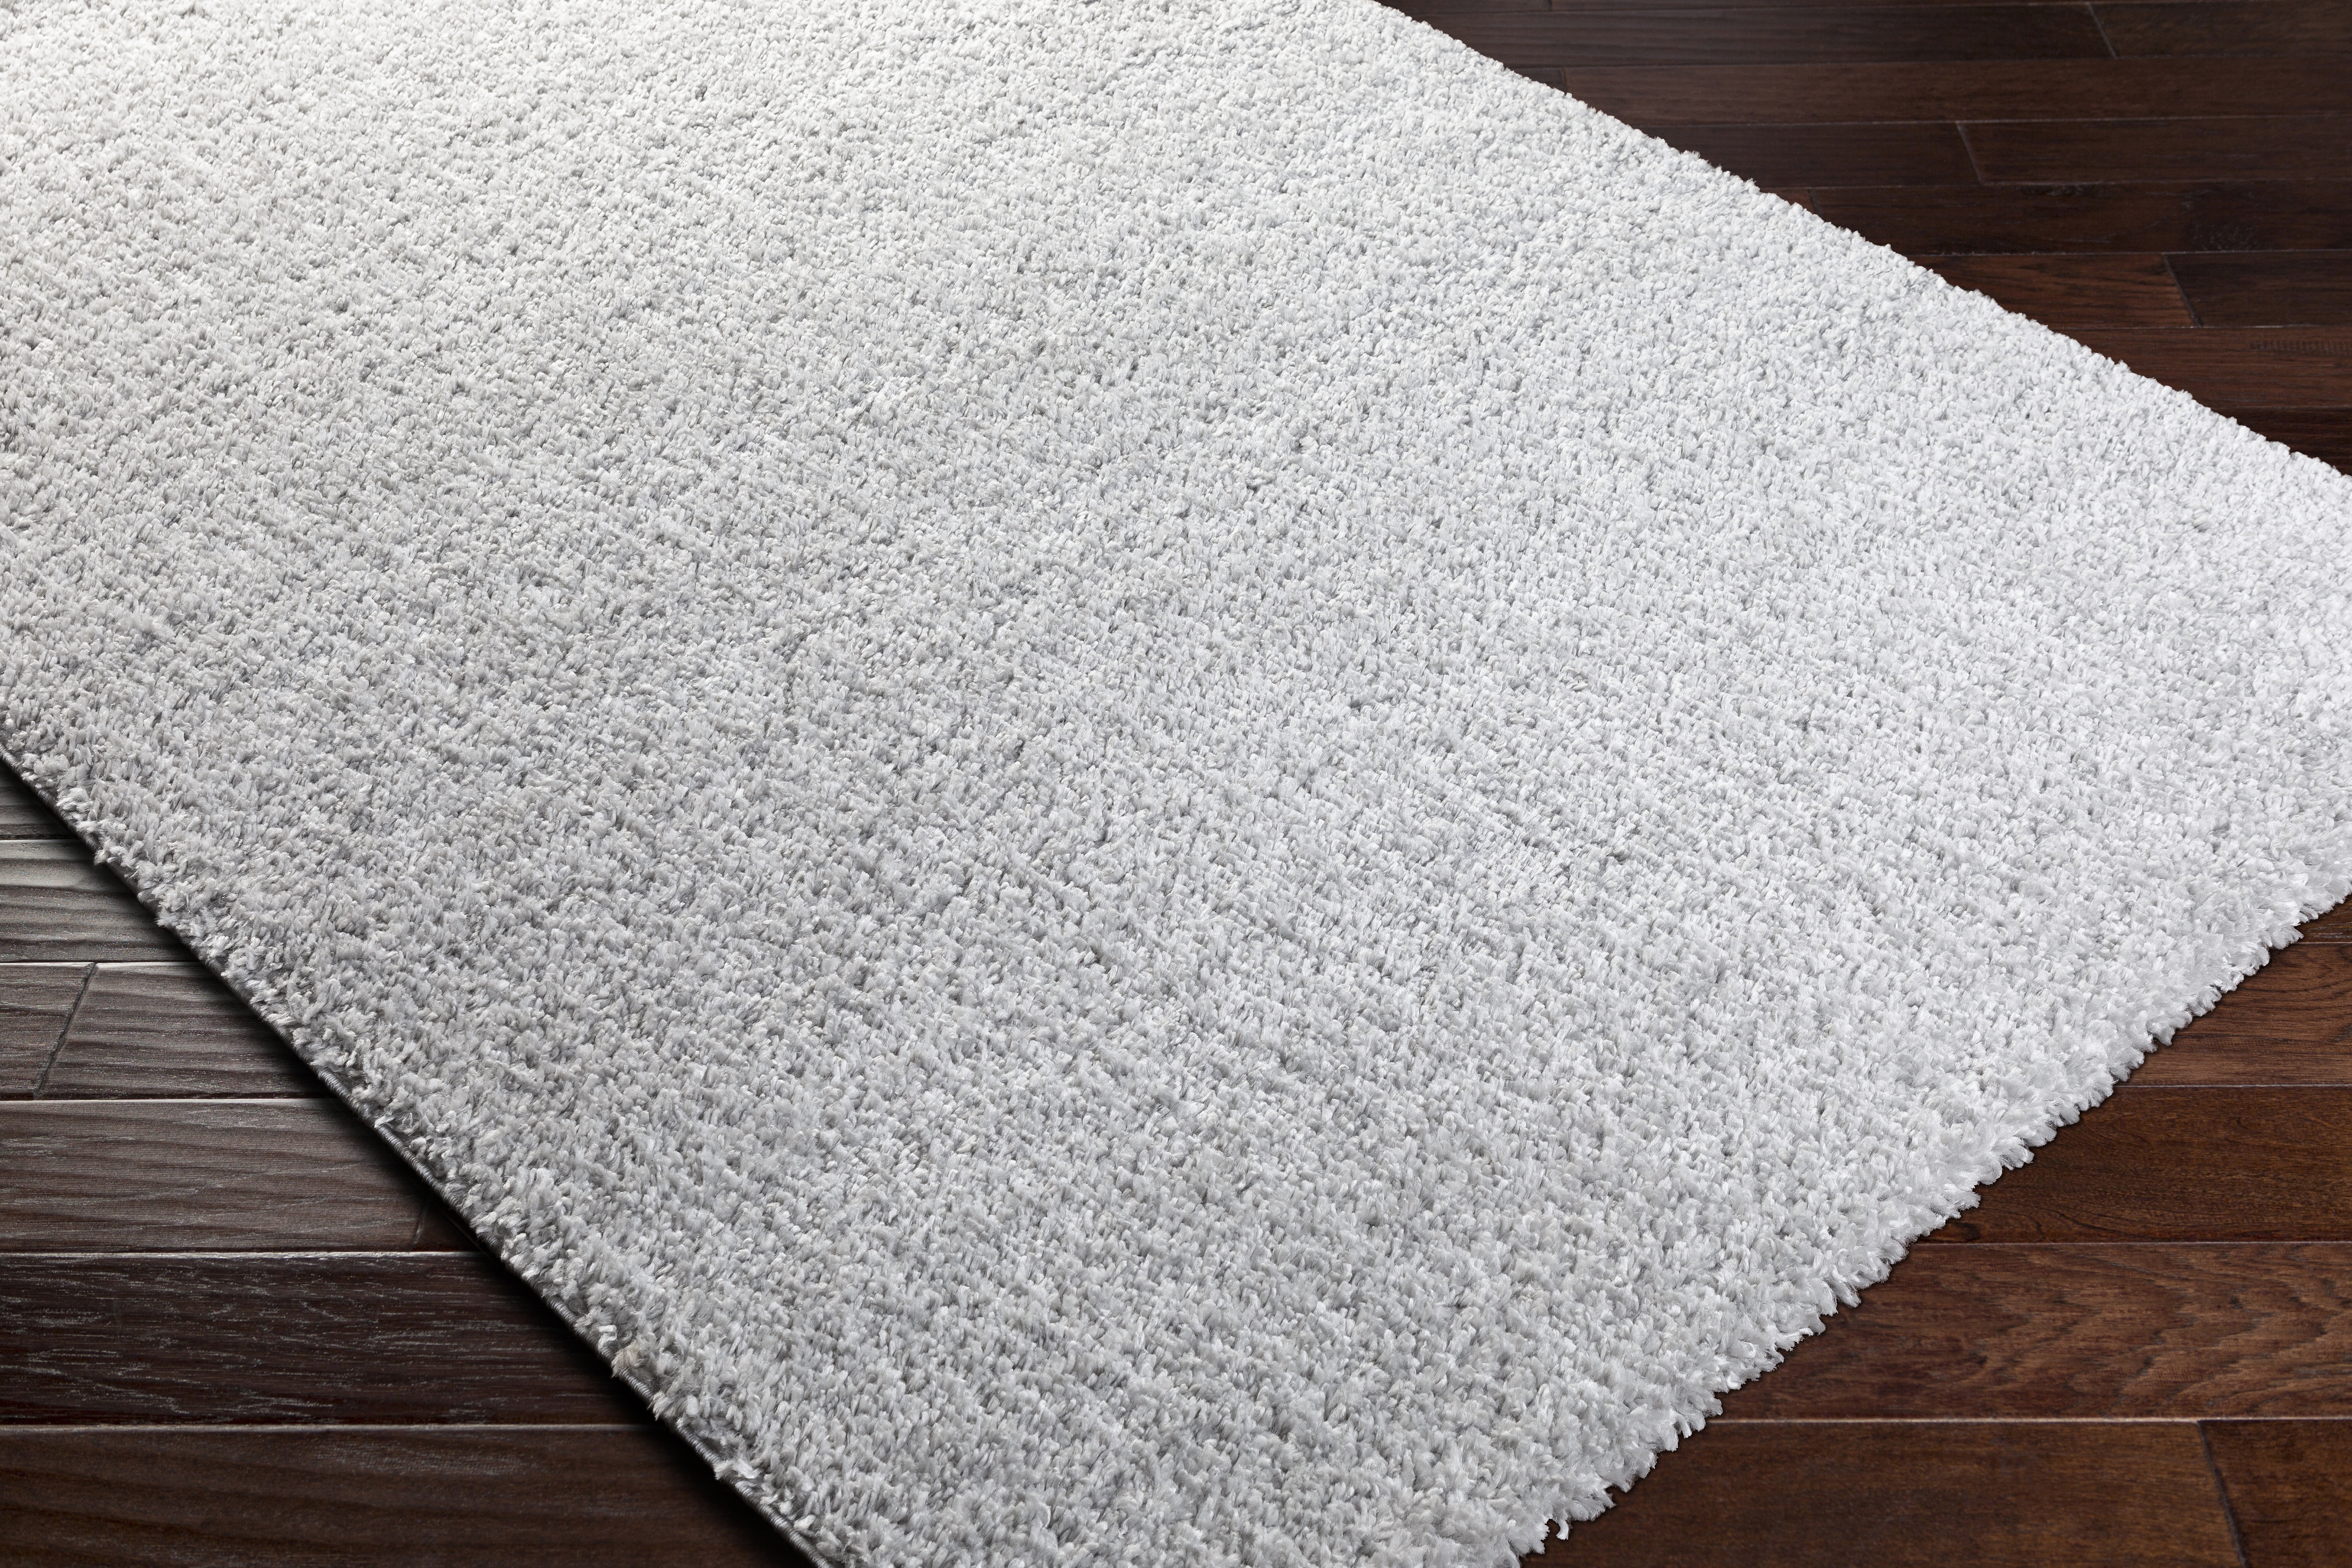 Deluxe Shag Rug, 9' x 12' - Image 6